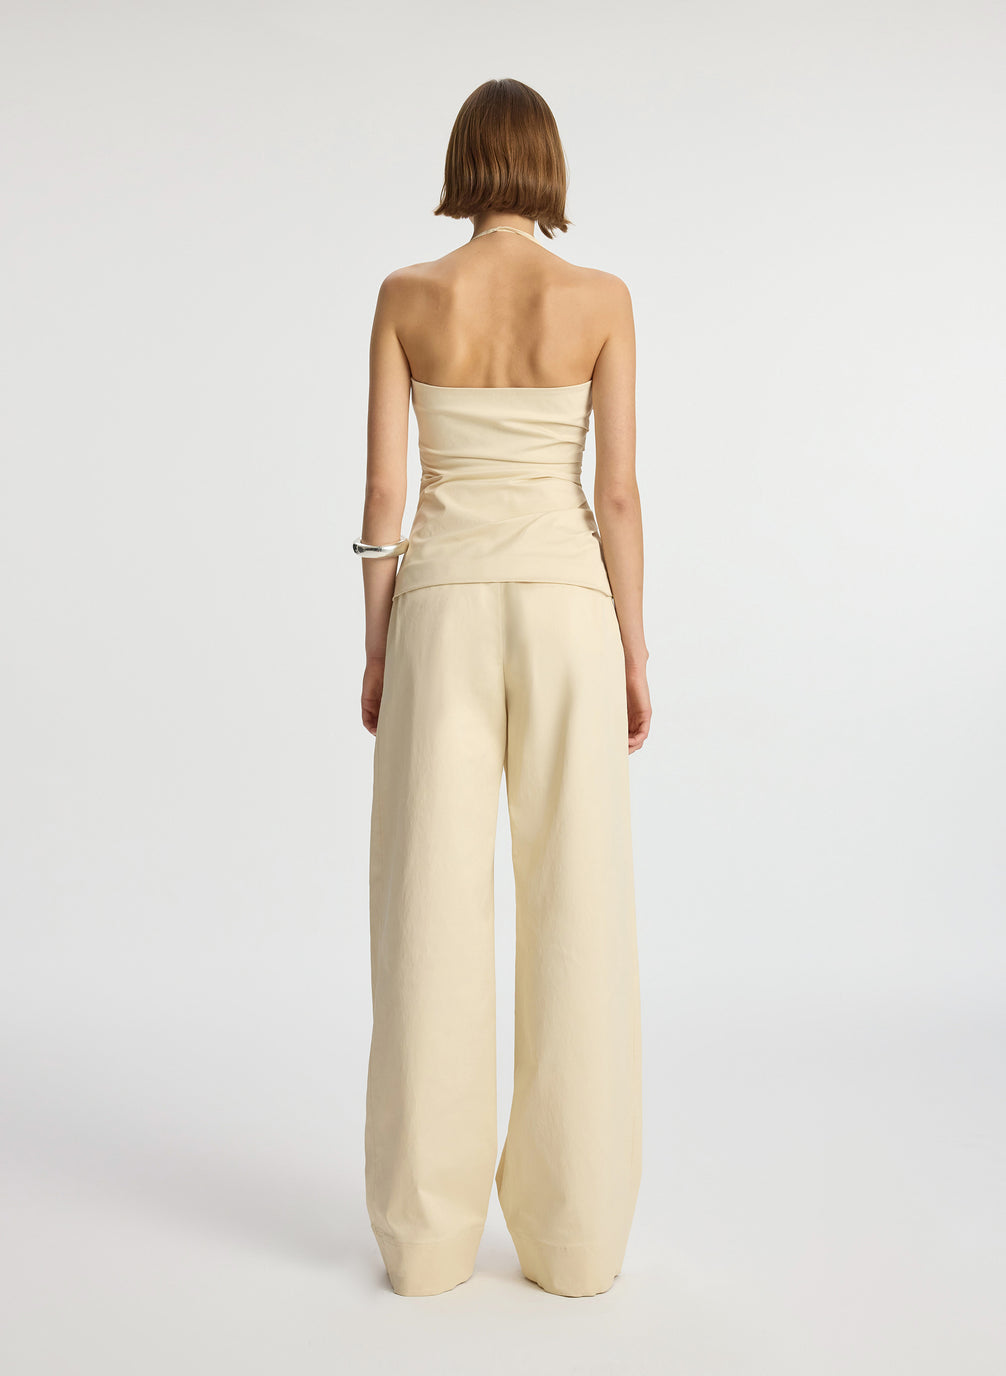 back  view of woman wearing beige halter top with side ruching and beige wide leg pant